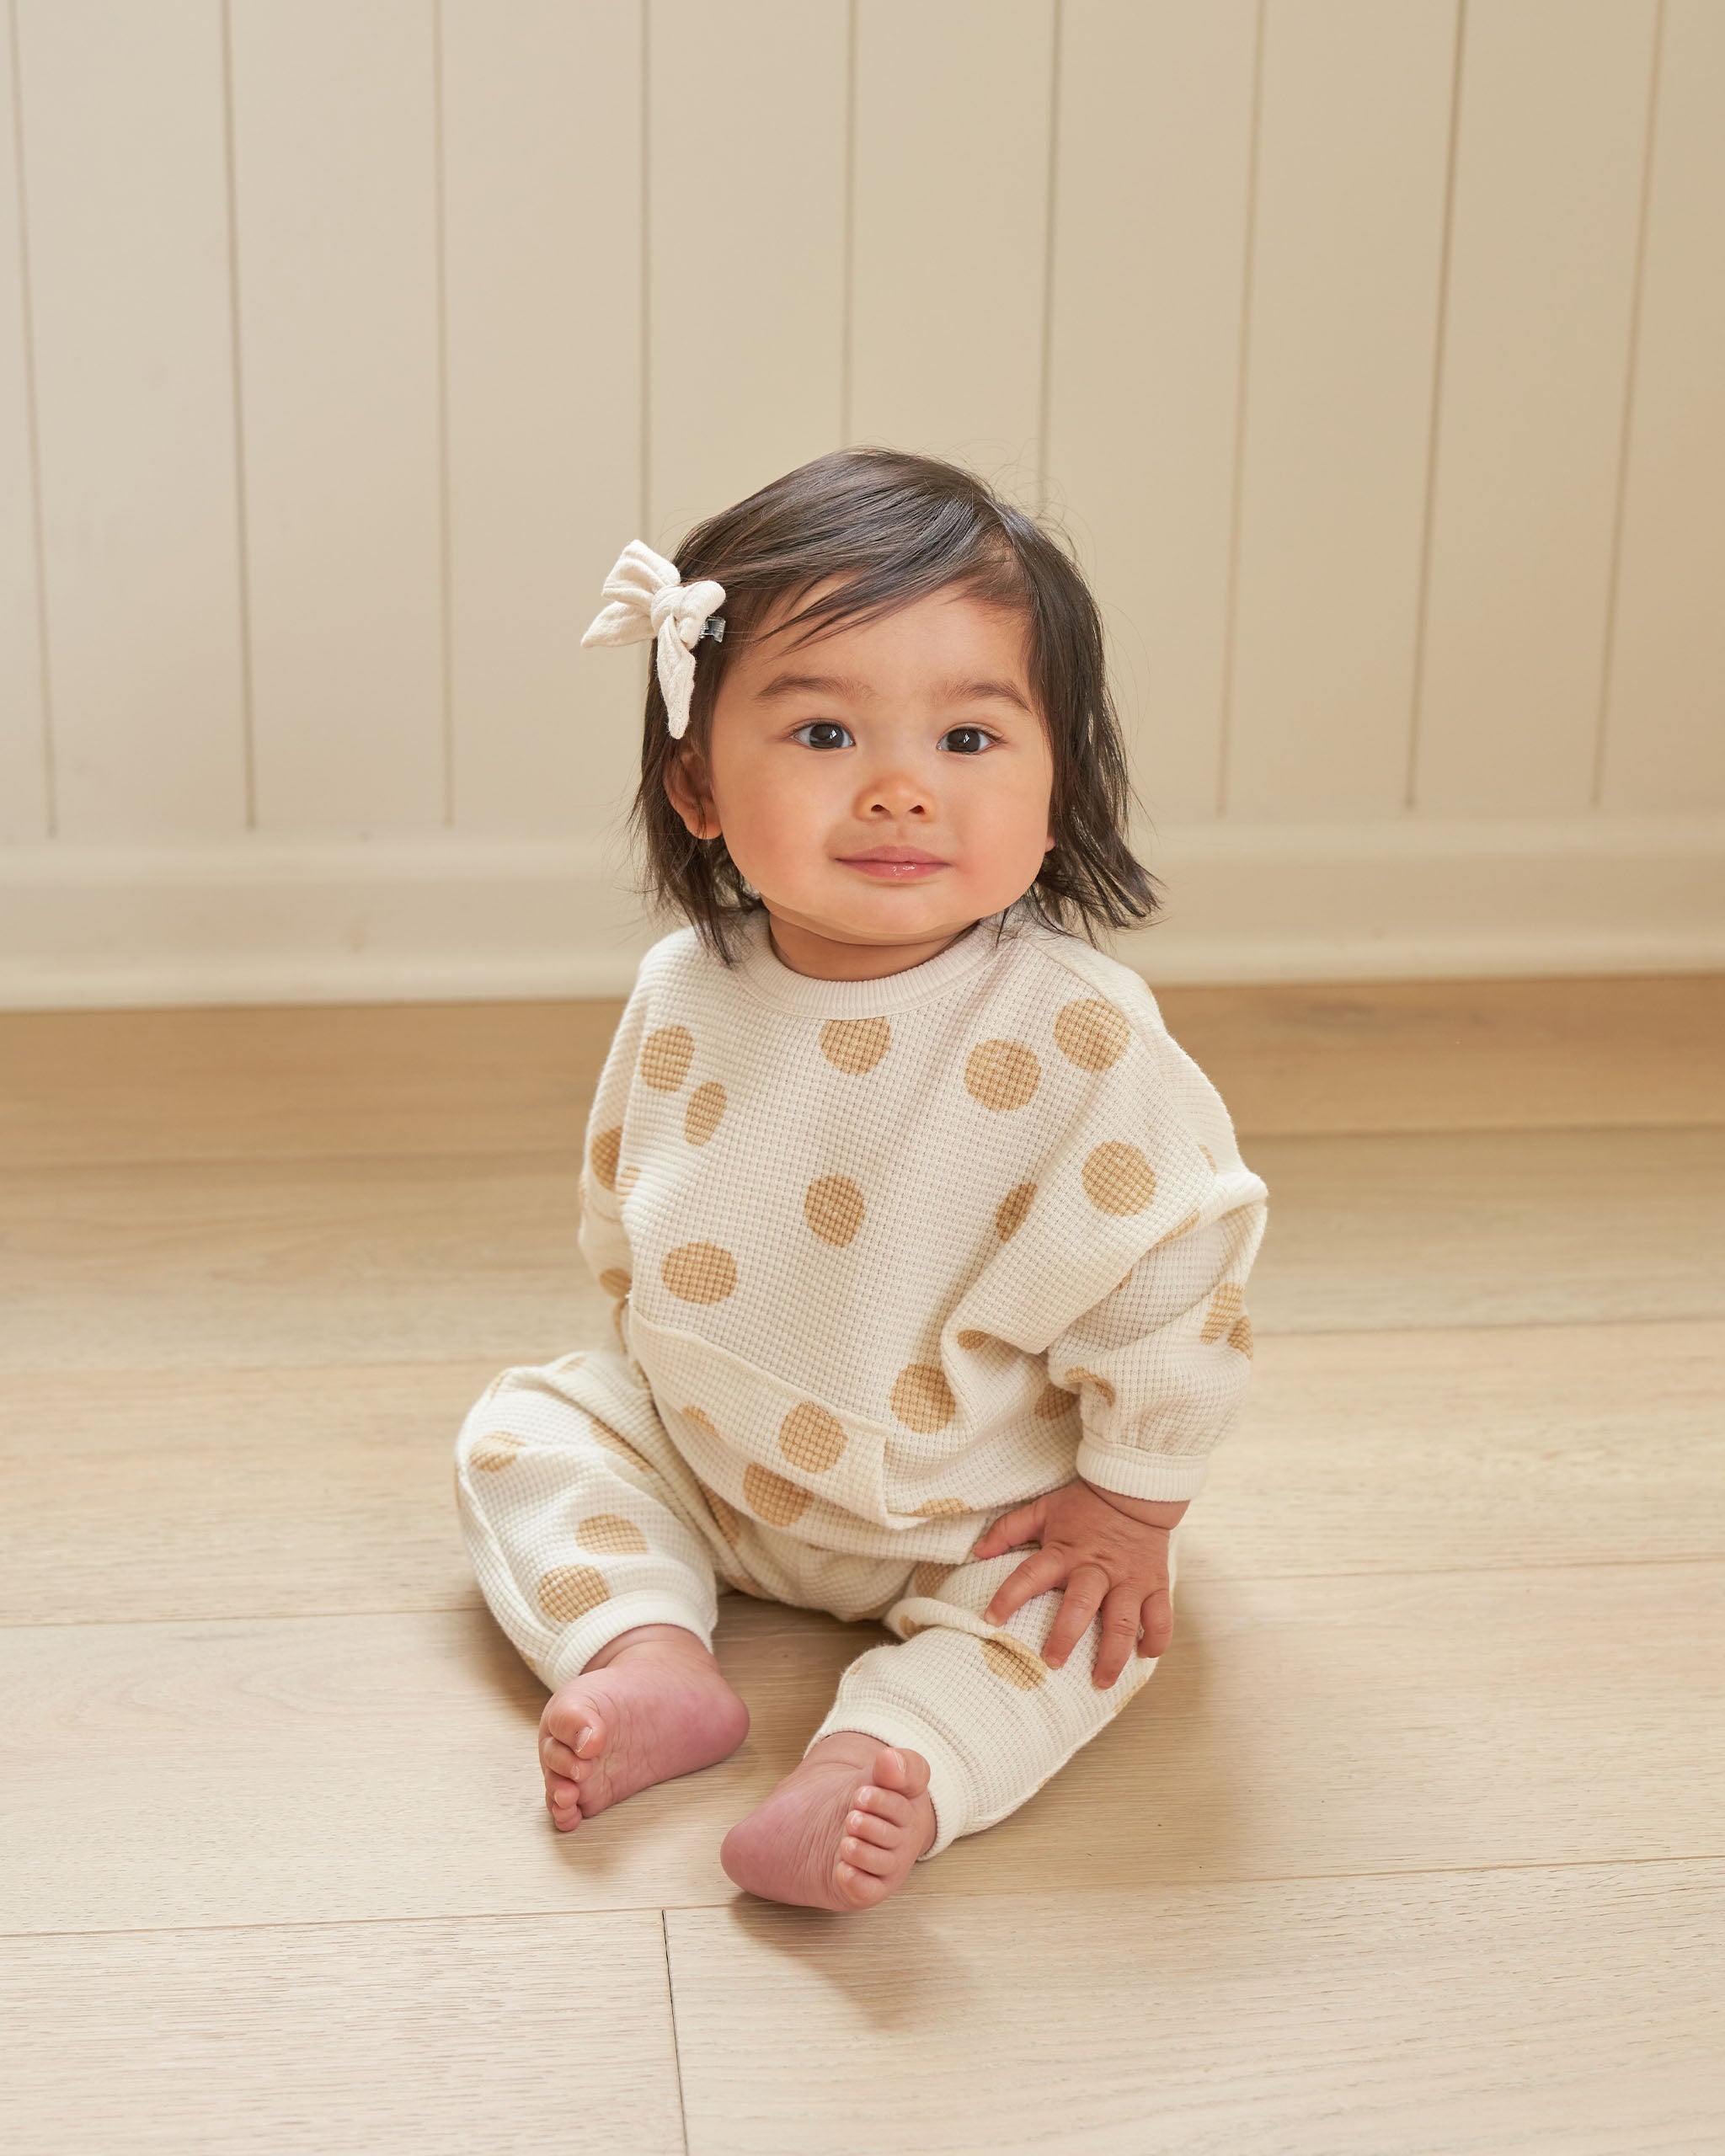 Waffle Sweater + Pant Set || Butter Dots - Rylee + Cru | Kids Clothes | Trendy Baby Clothes | Modern Infant Outfits |